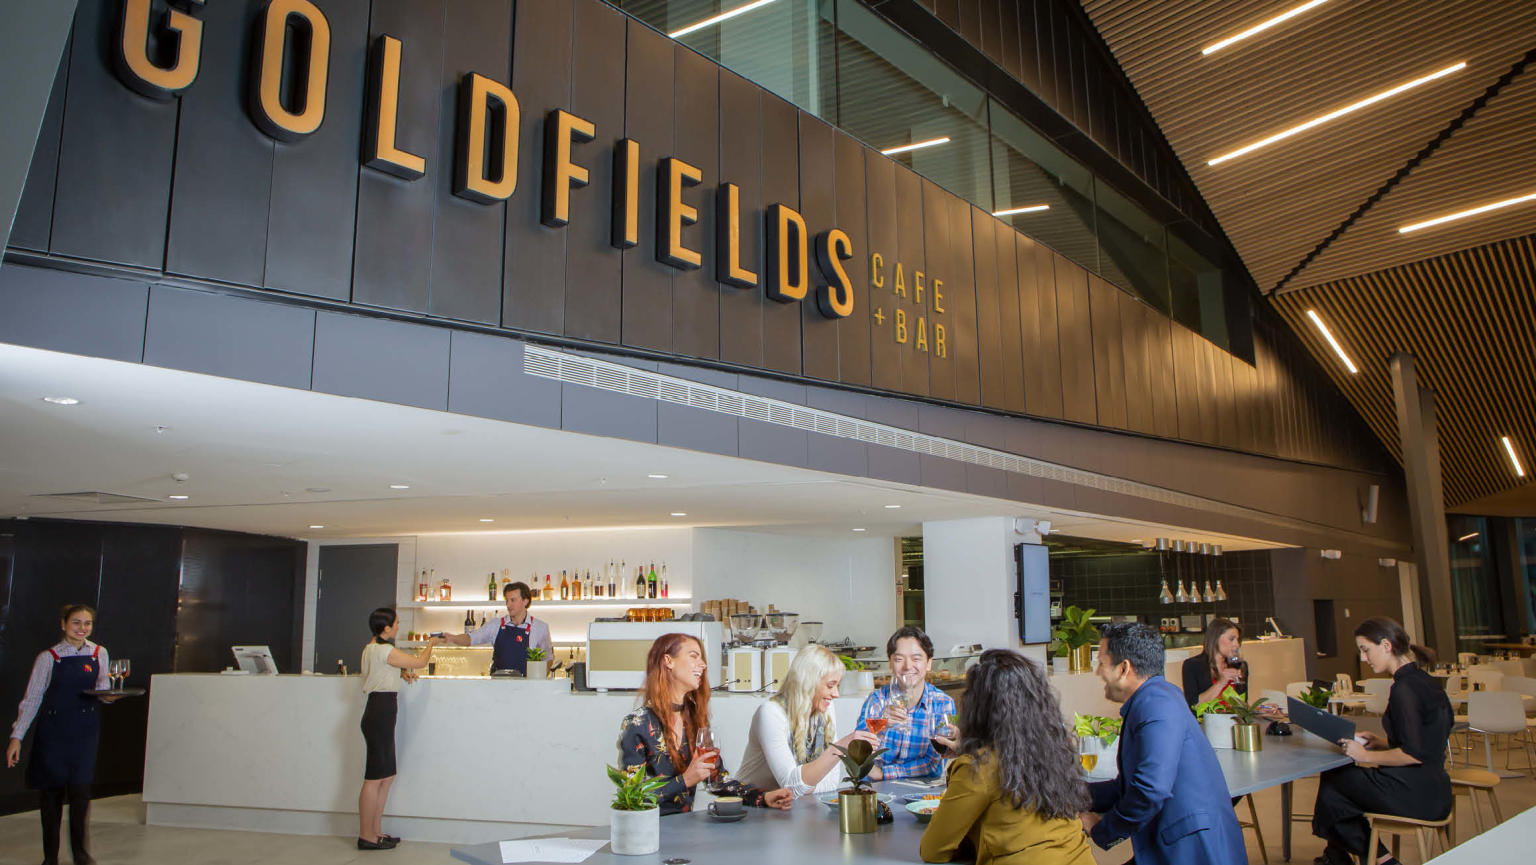 A vibrant café scene, where a group of people enjoys their time seated. Above them, a prominent sign displays 'Goldfields Cafe + Bar'. Behind the bar counter, a barista engages in conversation with a customer while preparing coffee. On the floor, another barista can be seen serving coffee.